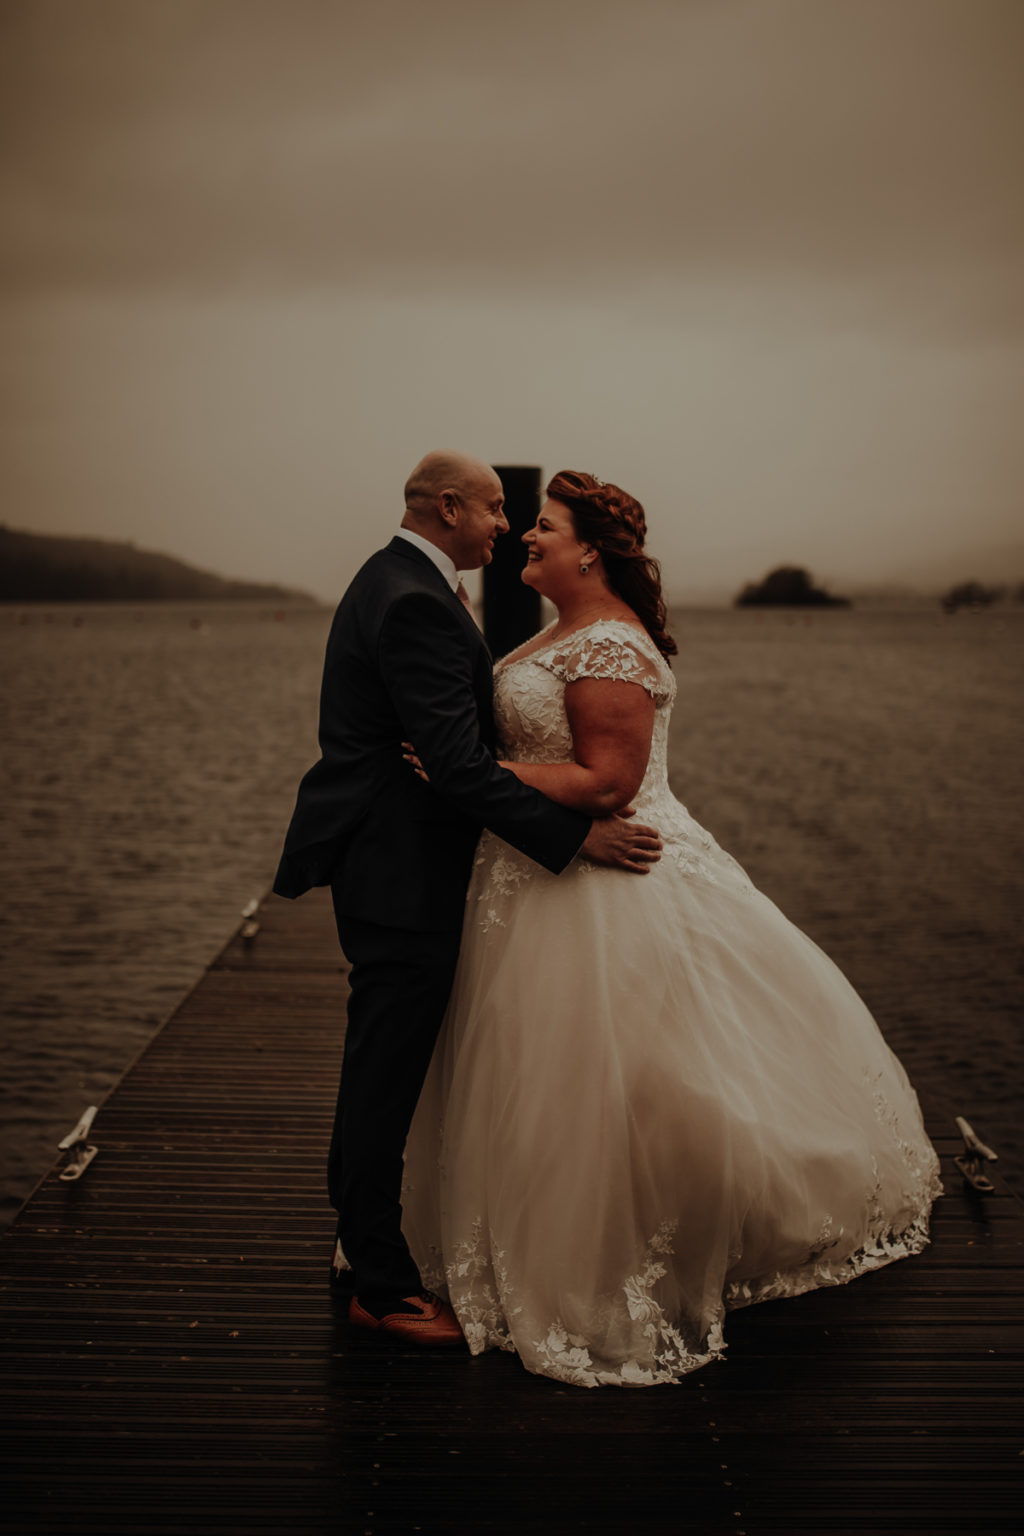 Romantic Micro Wedding At The Belsfield Hotel, Lake District